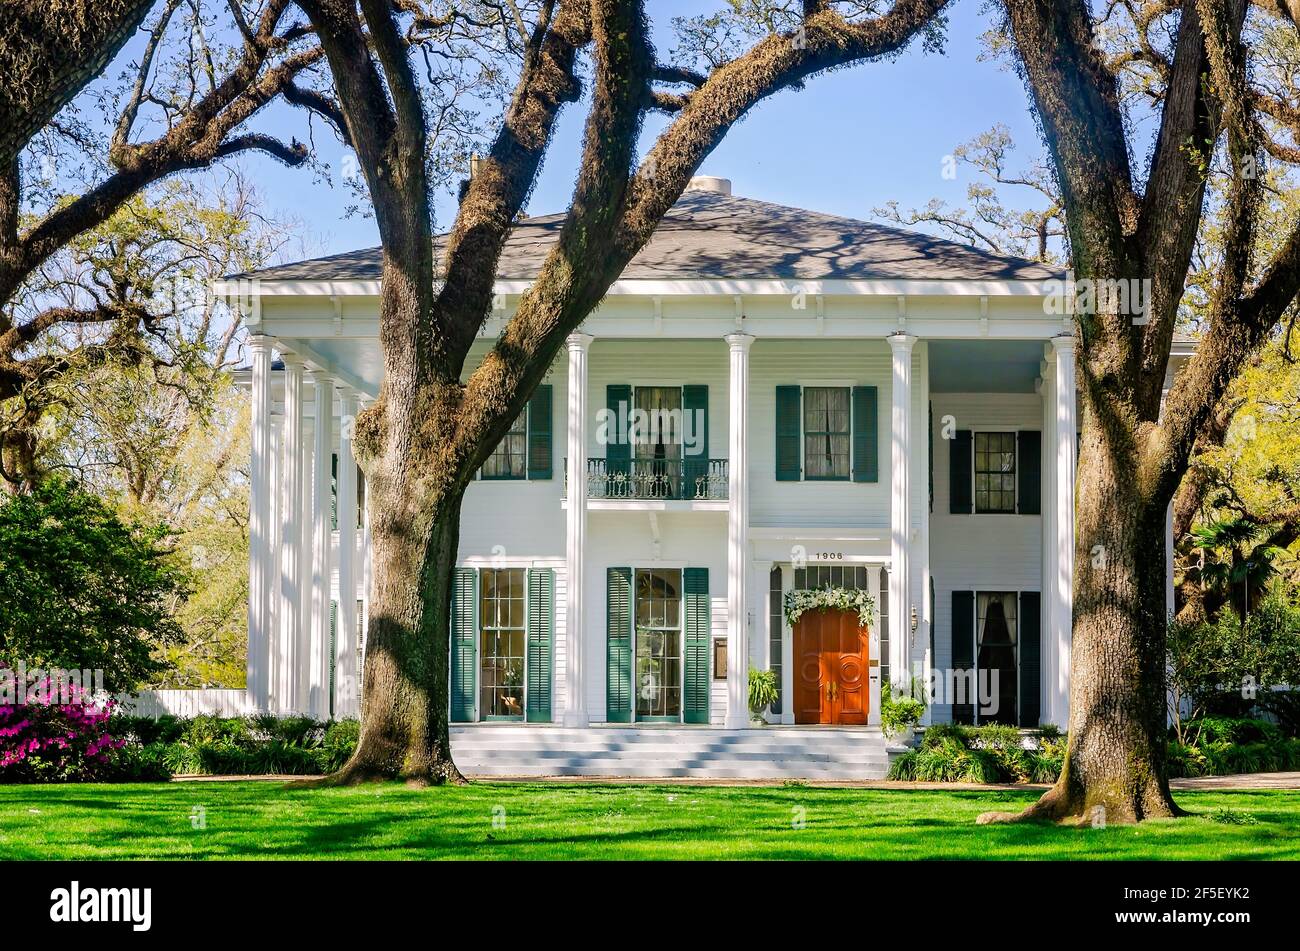 The Bragg-Mitchell Mansion is pictured, March 21, 2021, in Mobile, Alabama. The 1855 Greek Revival is a popular tourist attraction in Mobile, Alabama. Stock Photo